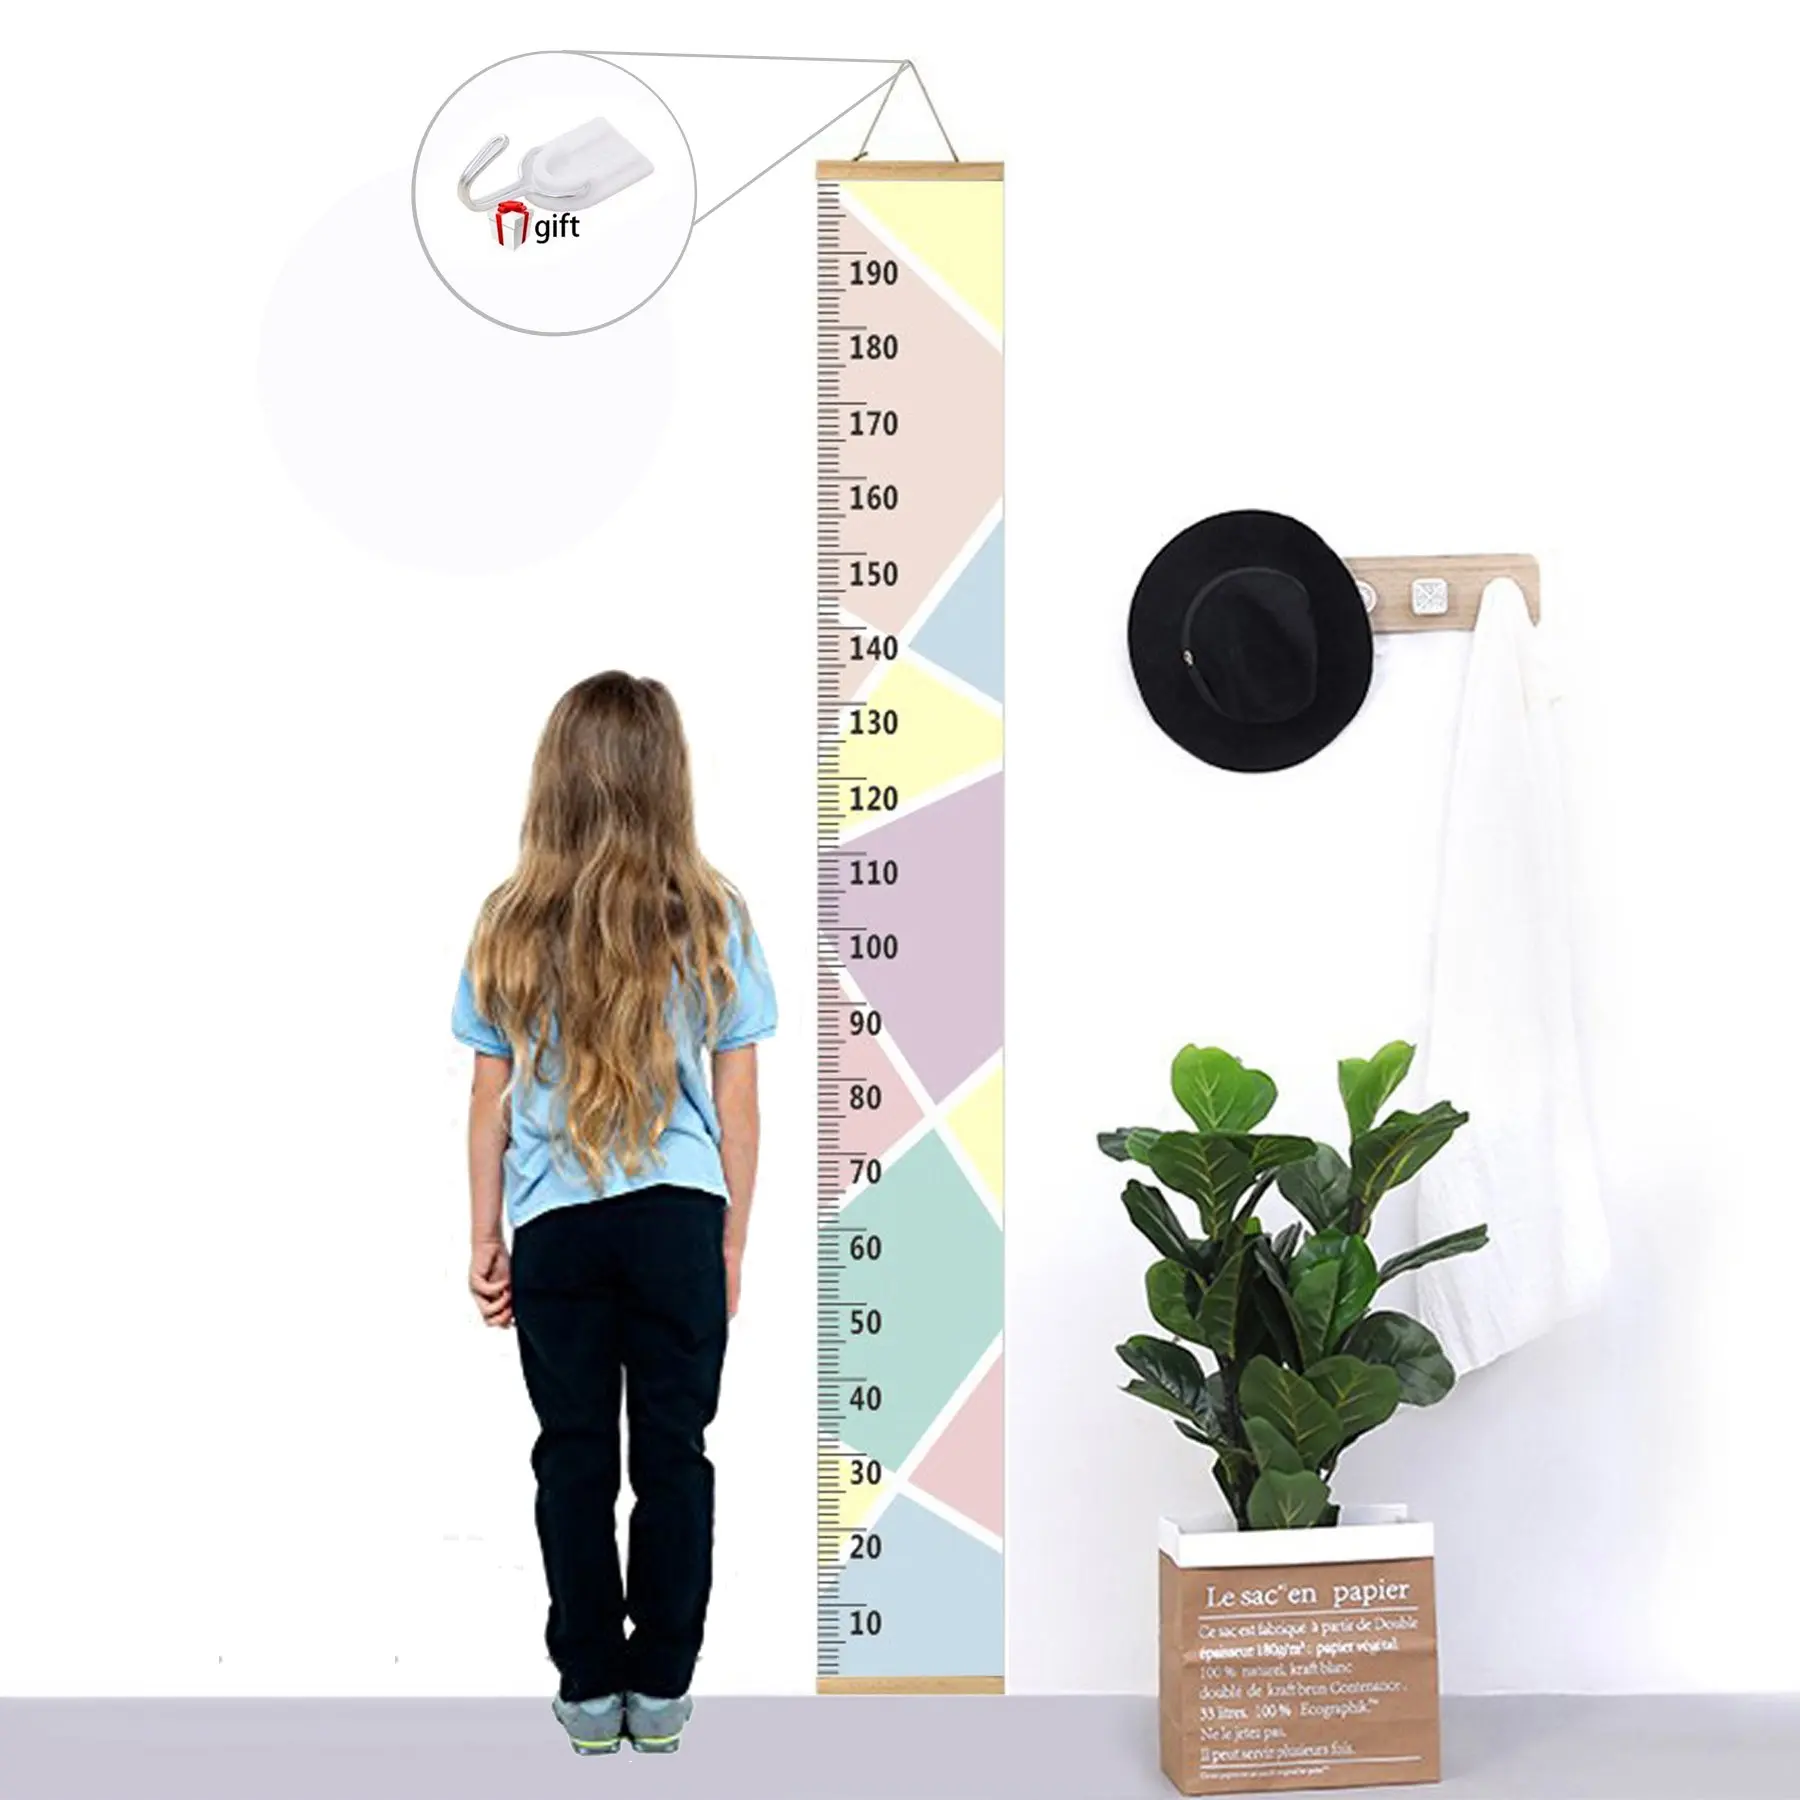 Childrens Growth Chart For Wall